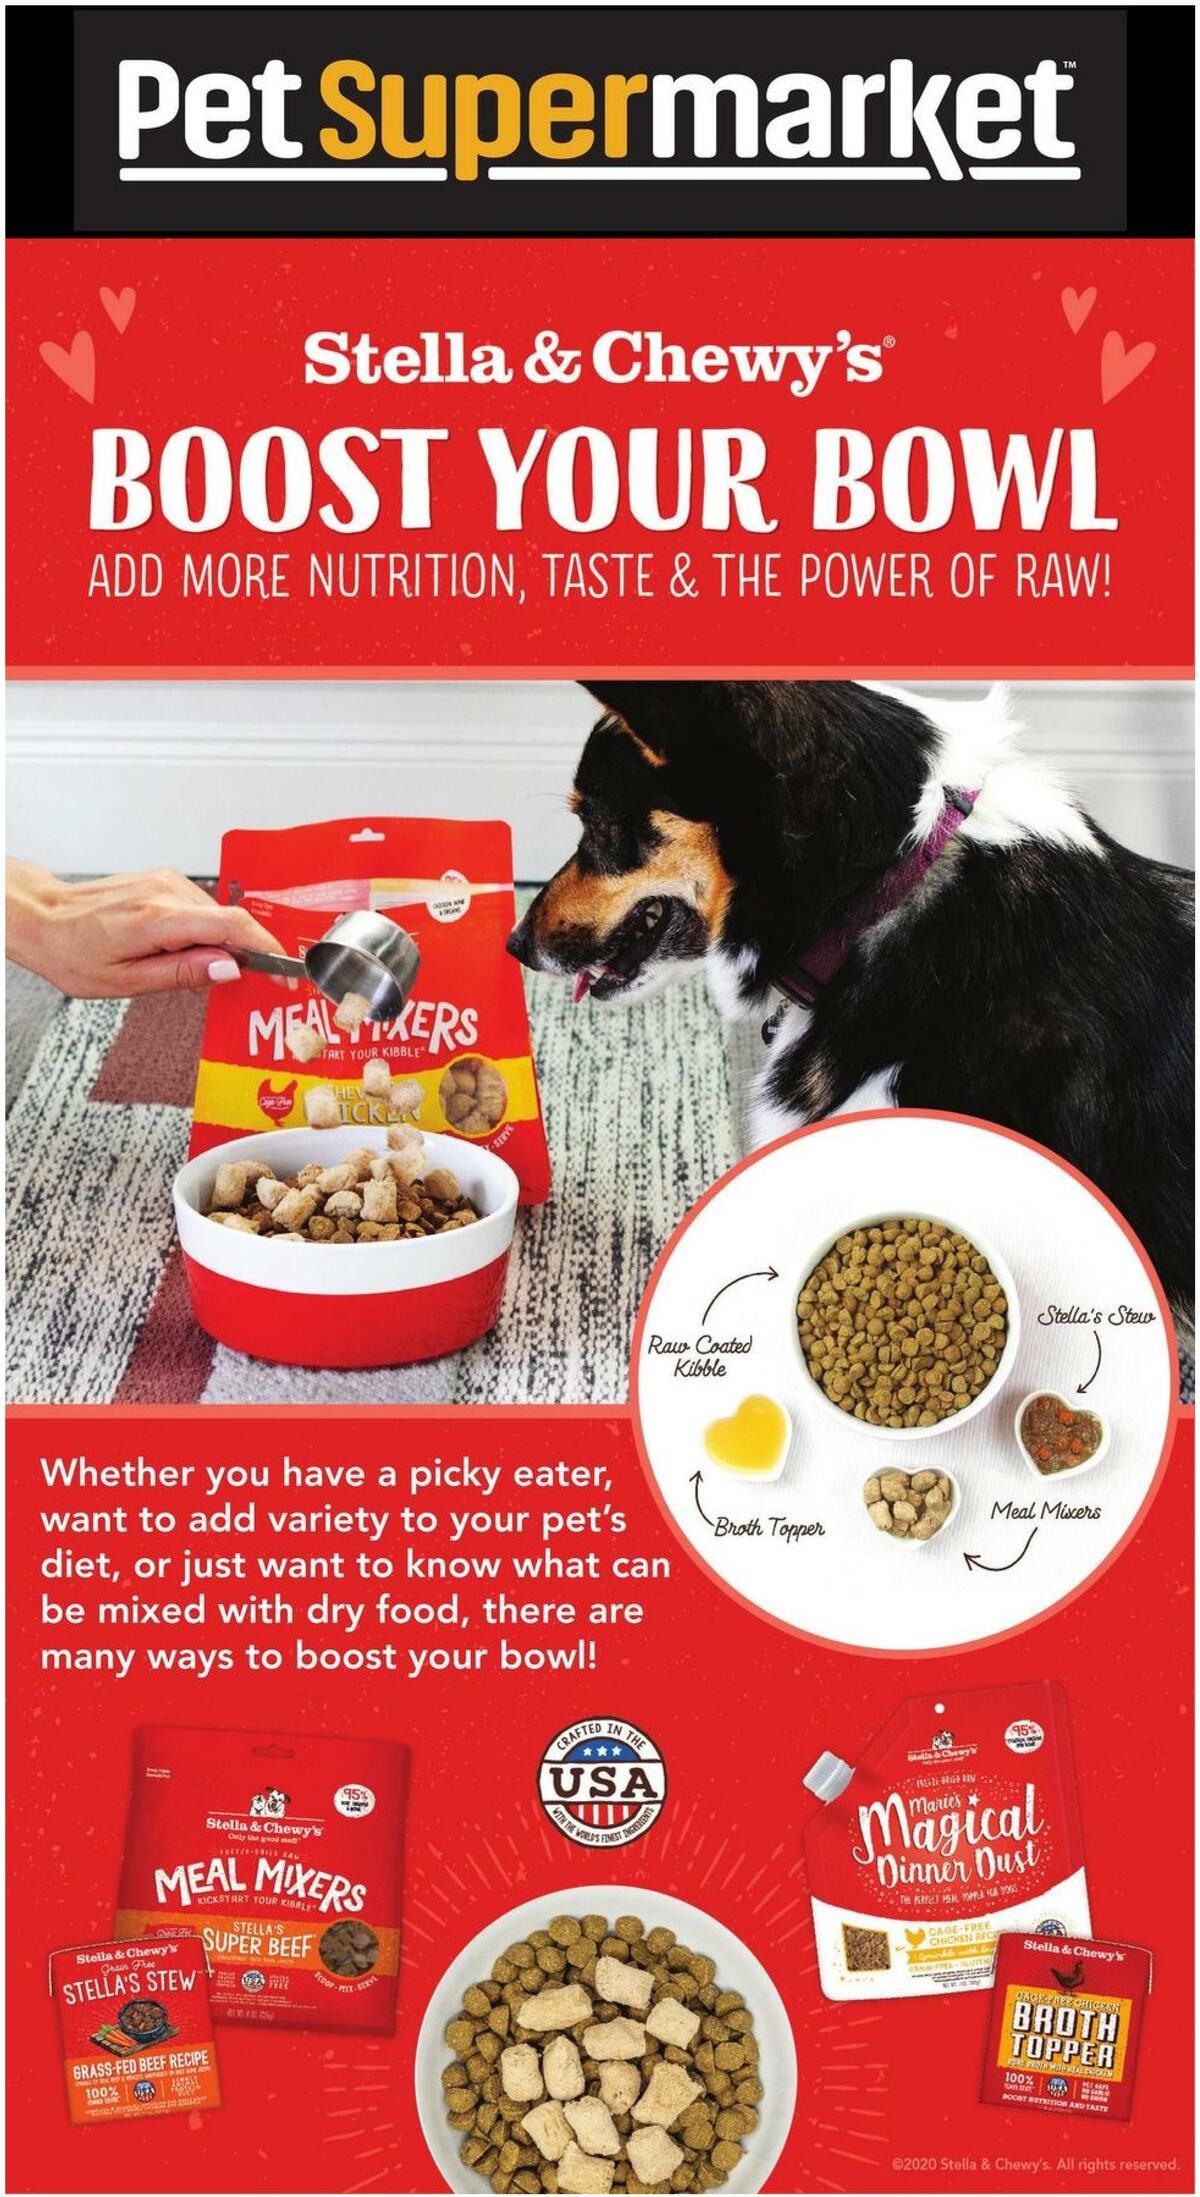 Pet Supermarket Bowl with Stella & Chewy Weekly Ad from April 5